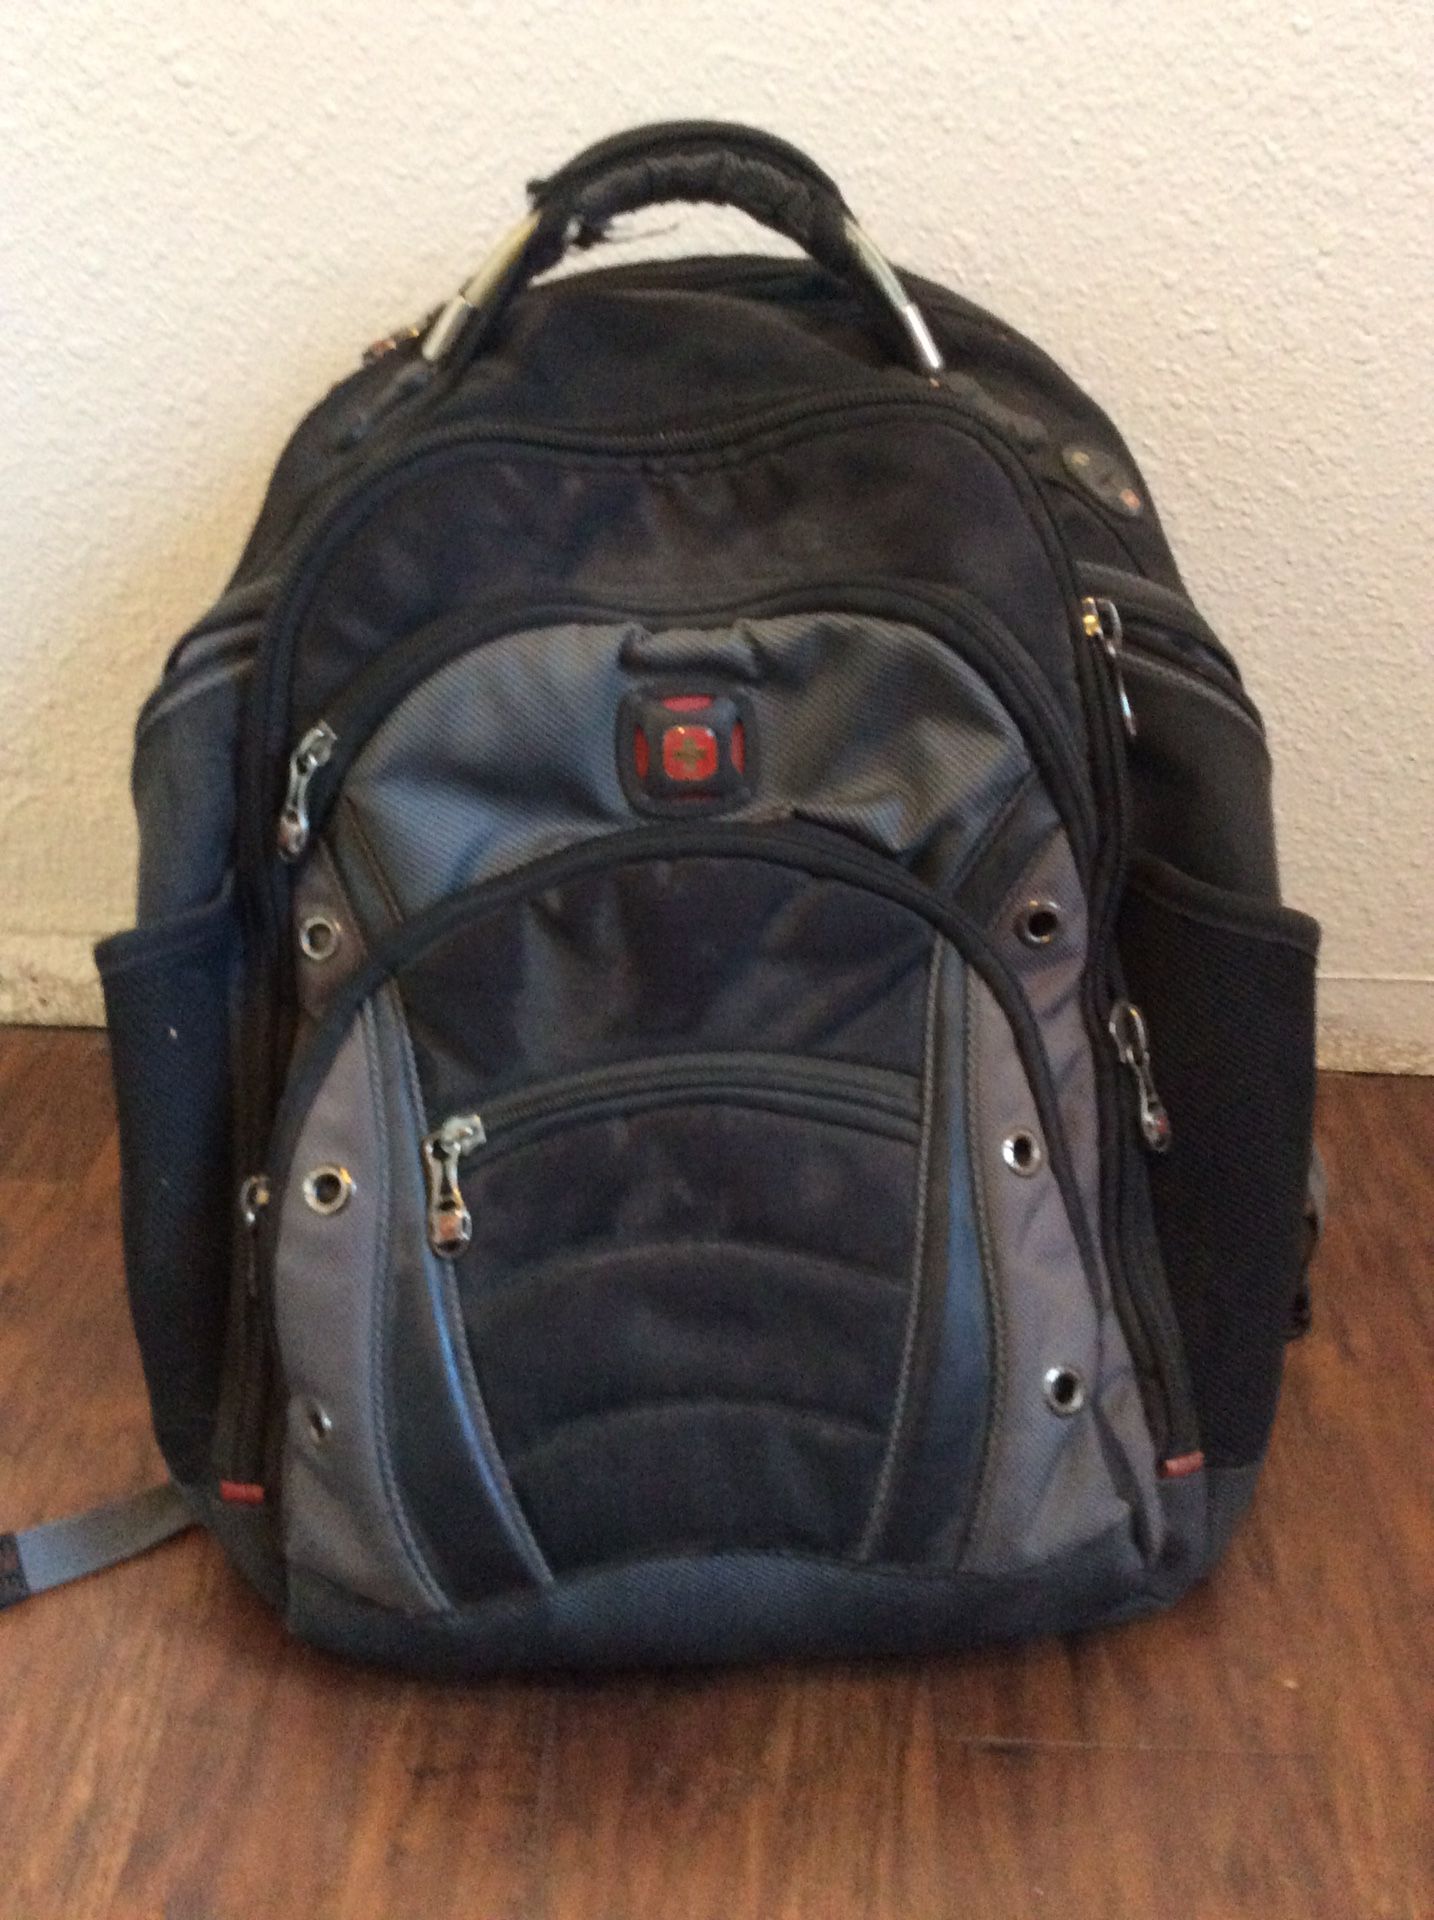 Swiss Gear laptop backpack, excellent condition